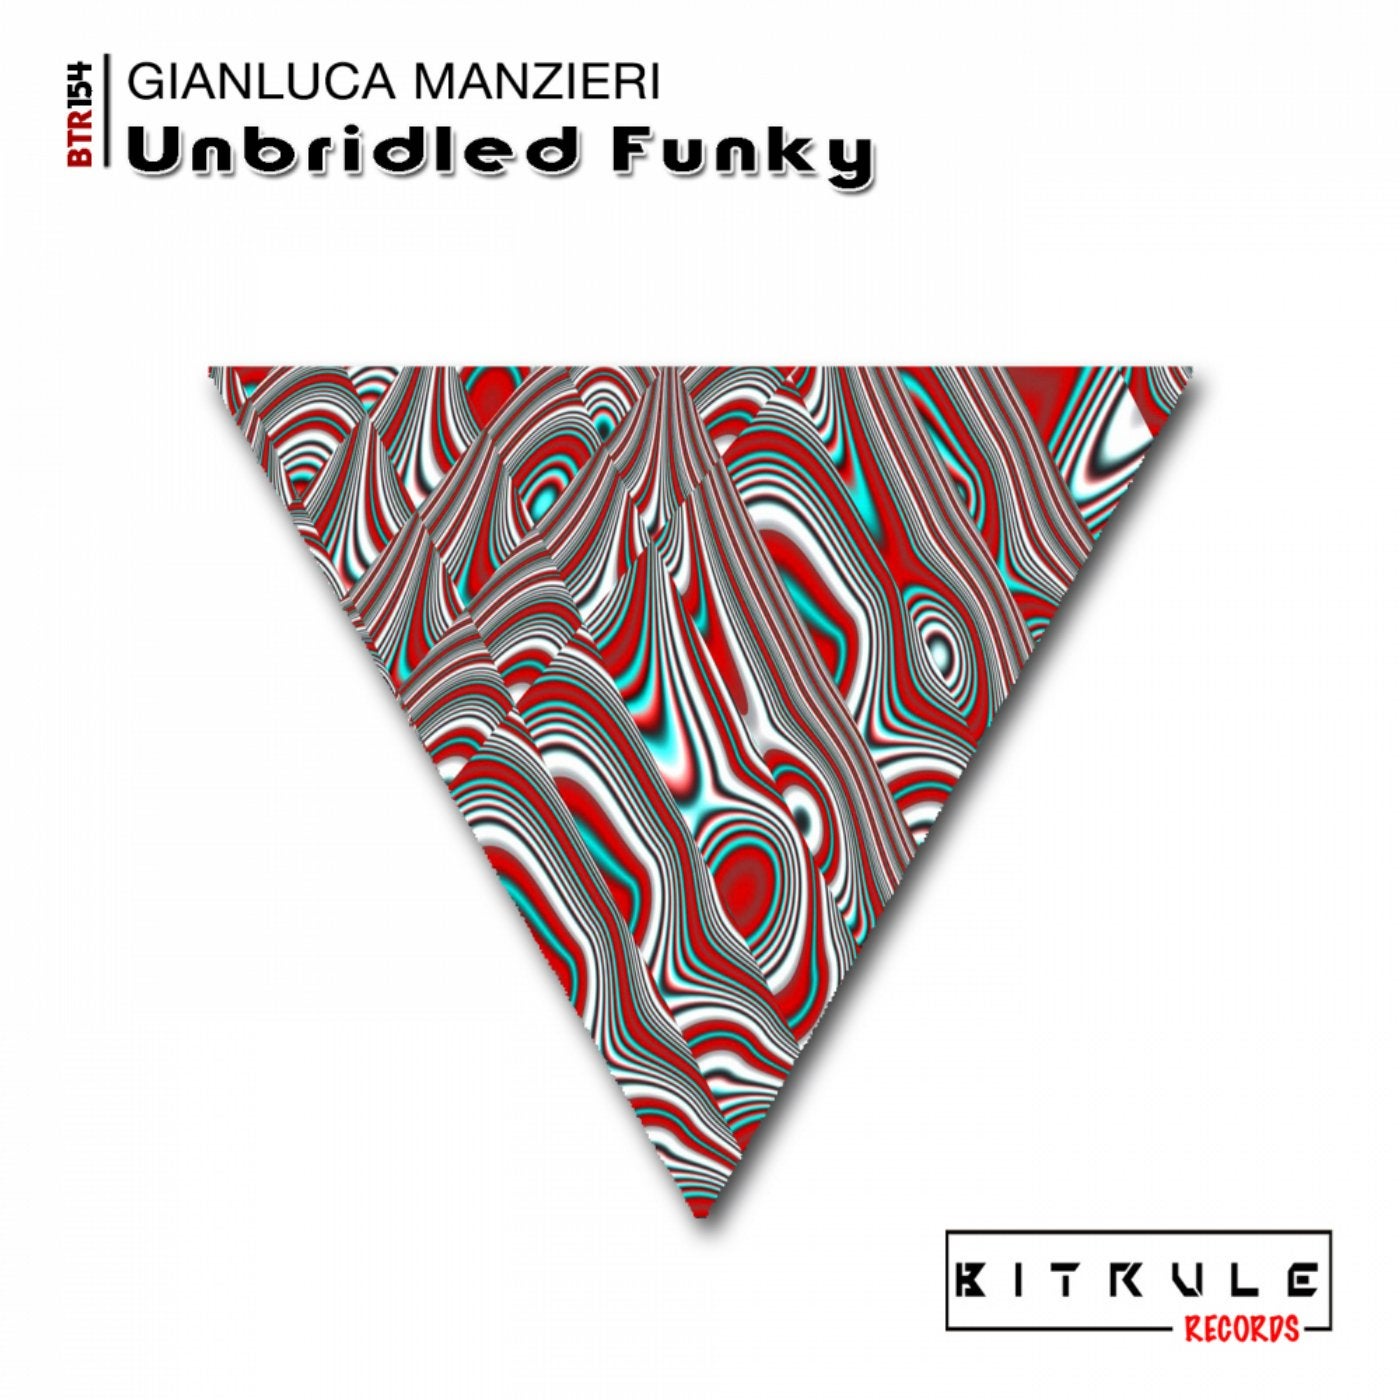 Unbridled Funky